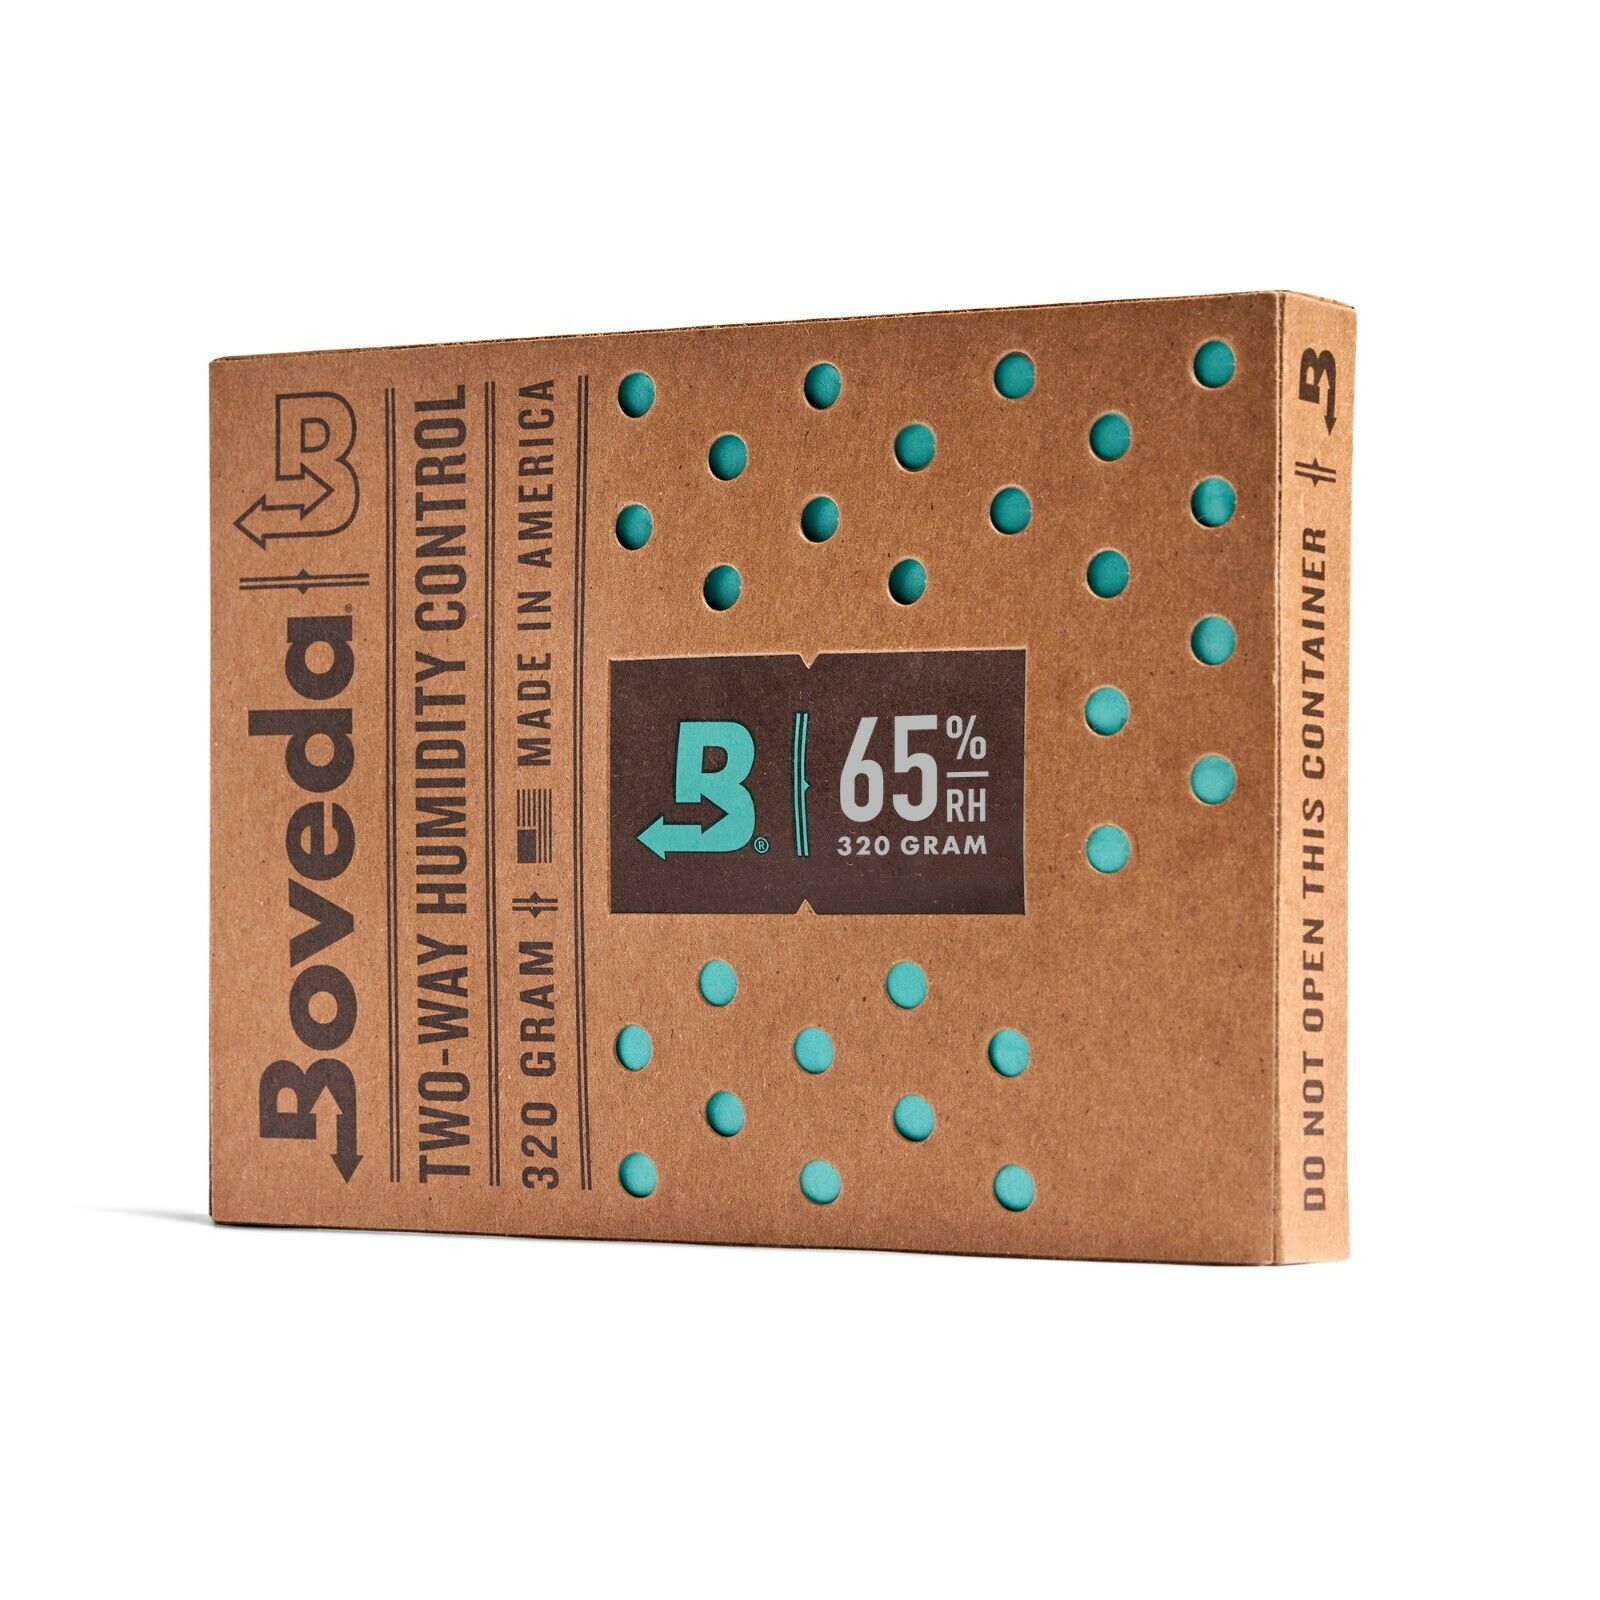 Boveda 65% RH 2-Way Humidity Control - Protects & Restores - Size 320 - 1 Count